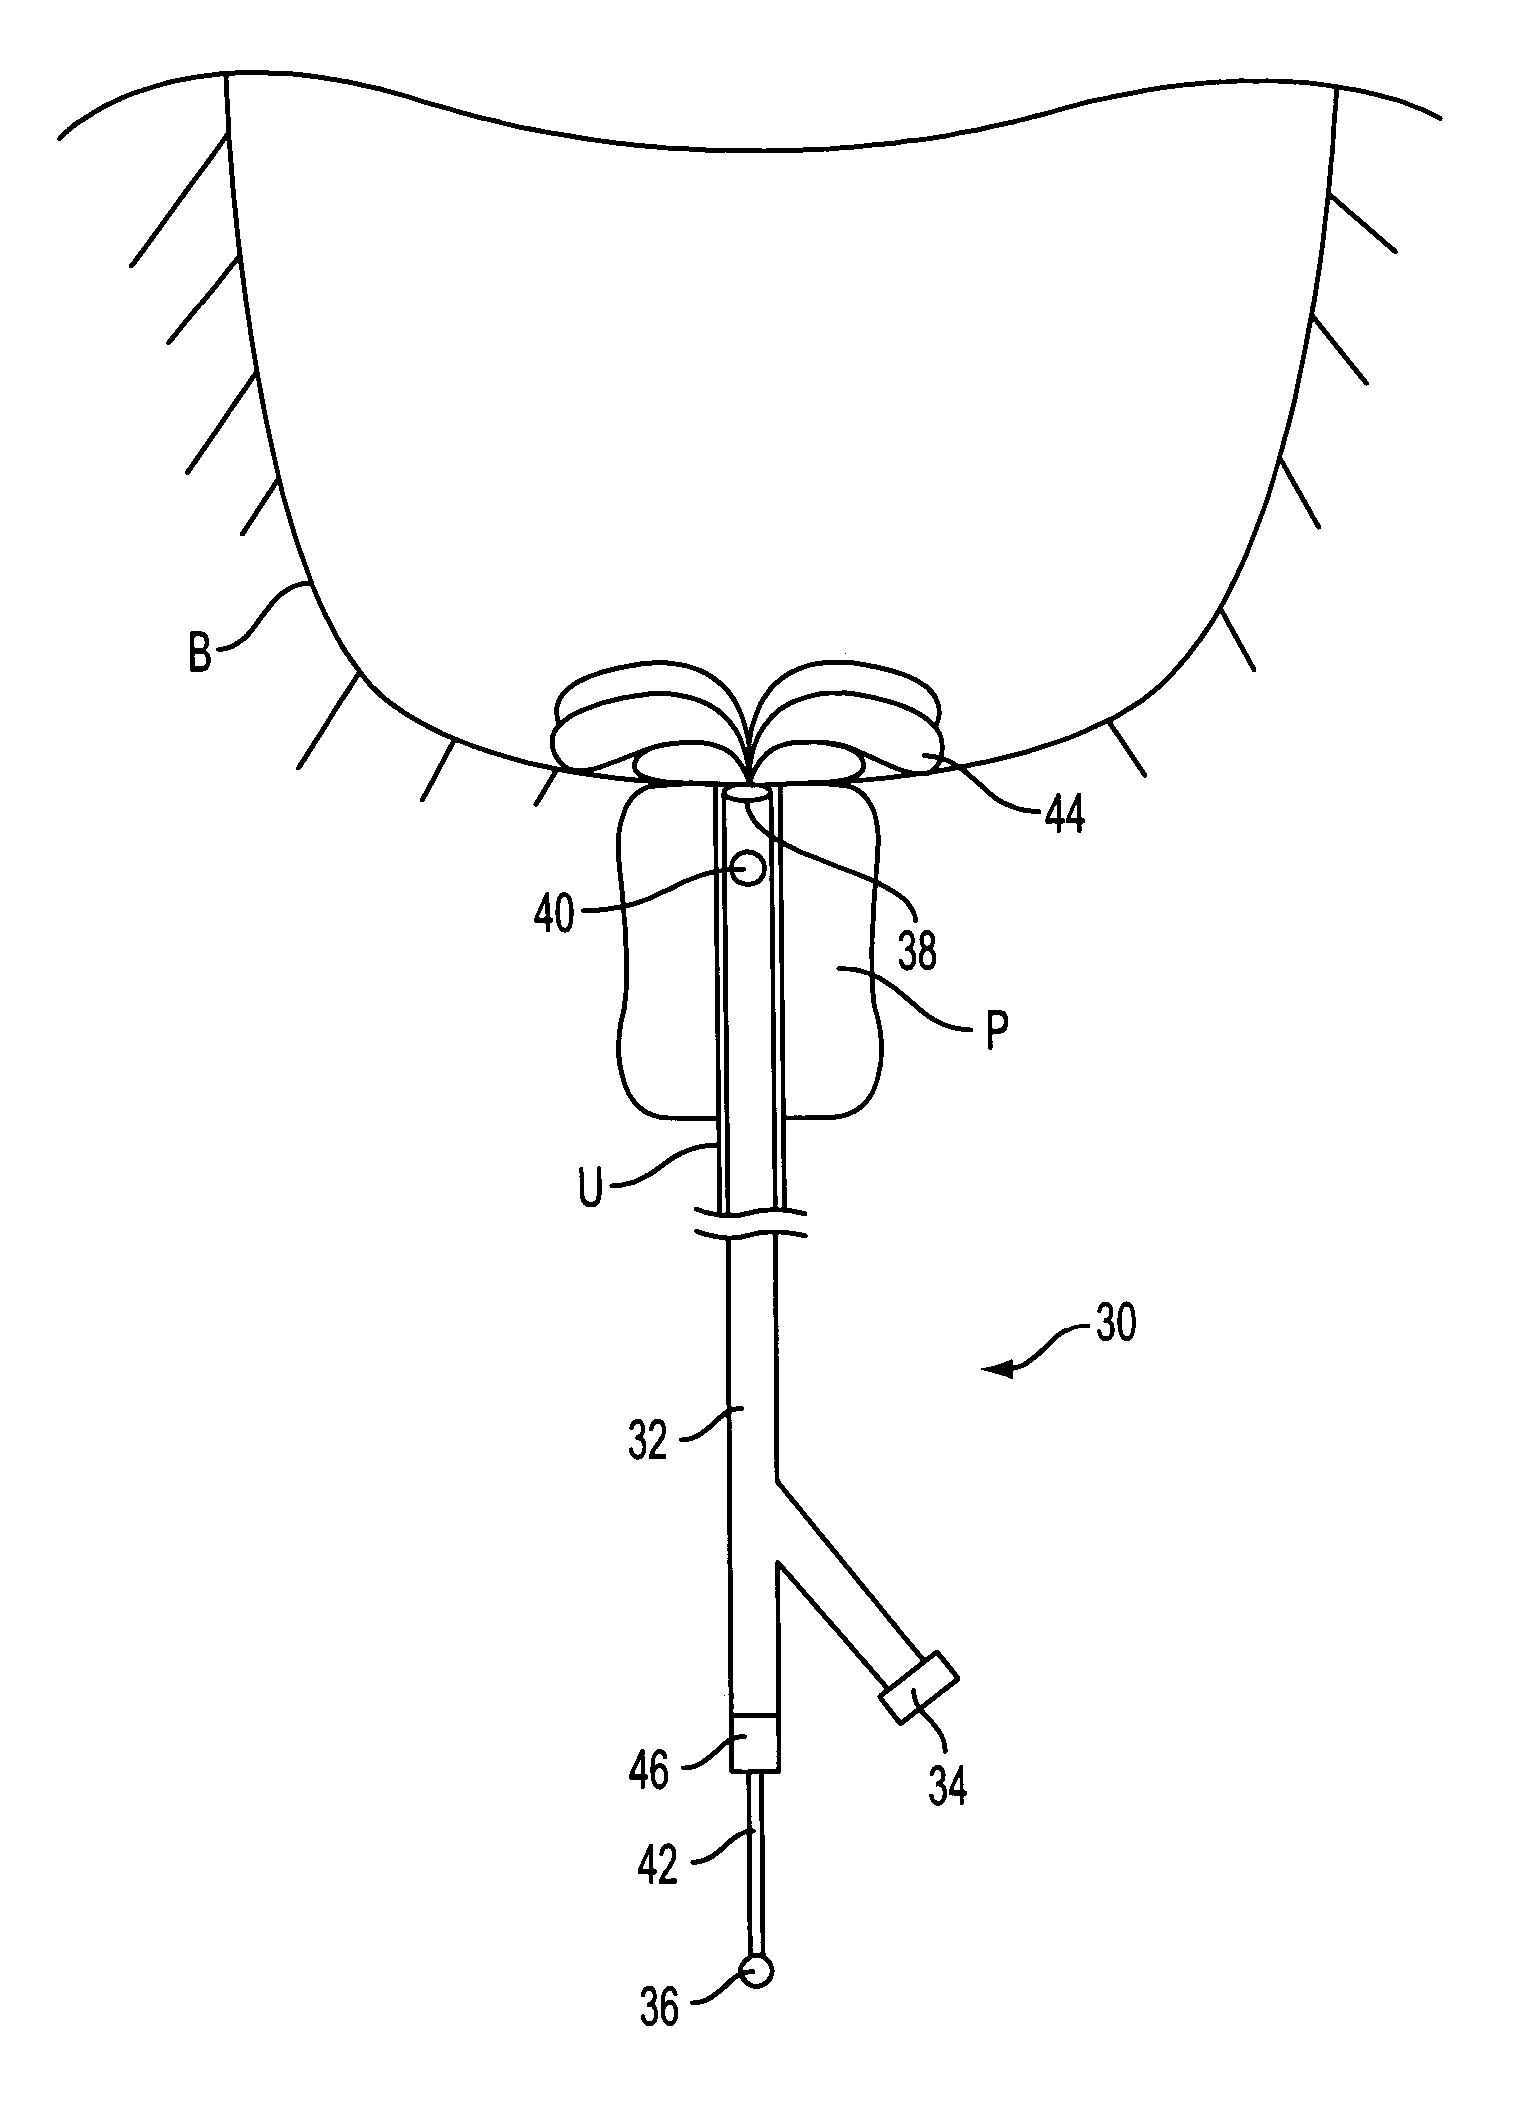 Prostate visualization device and methods of use